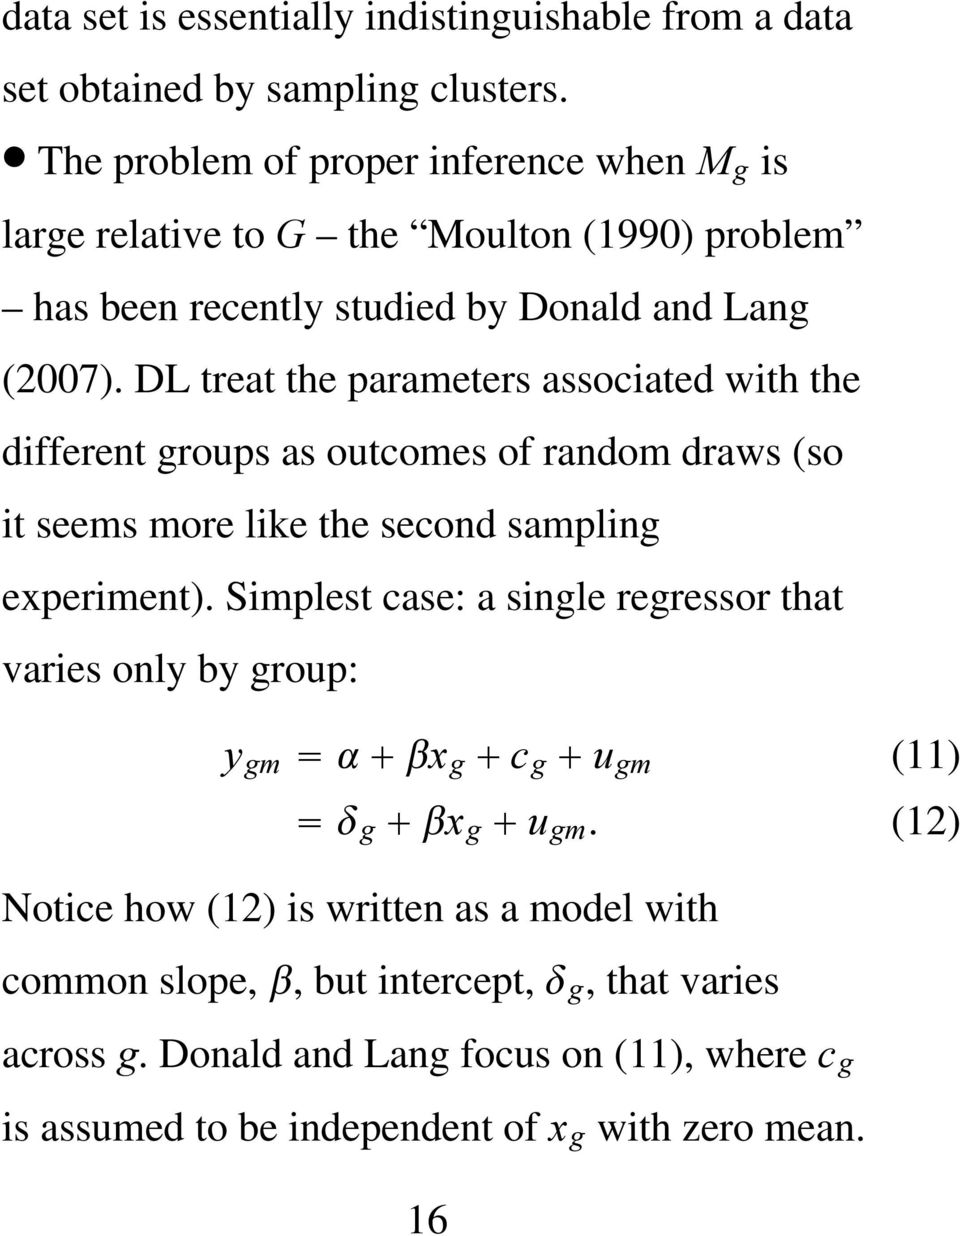 DL treat the parameters associated with the different groups as outcomes of random draws (so it seems more like the second sampling experiment).